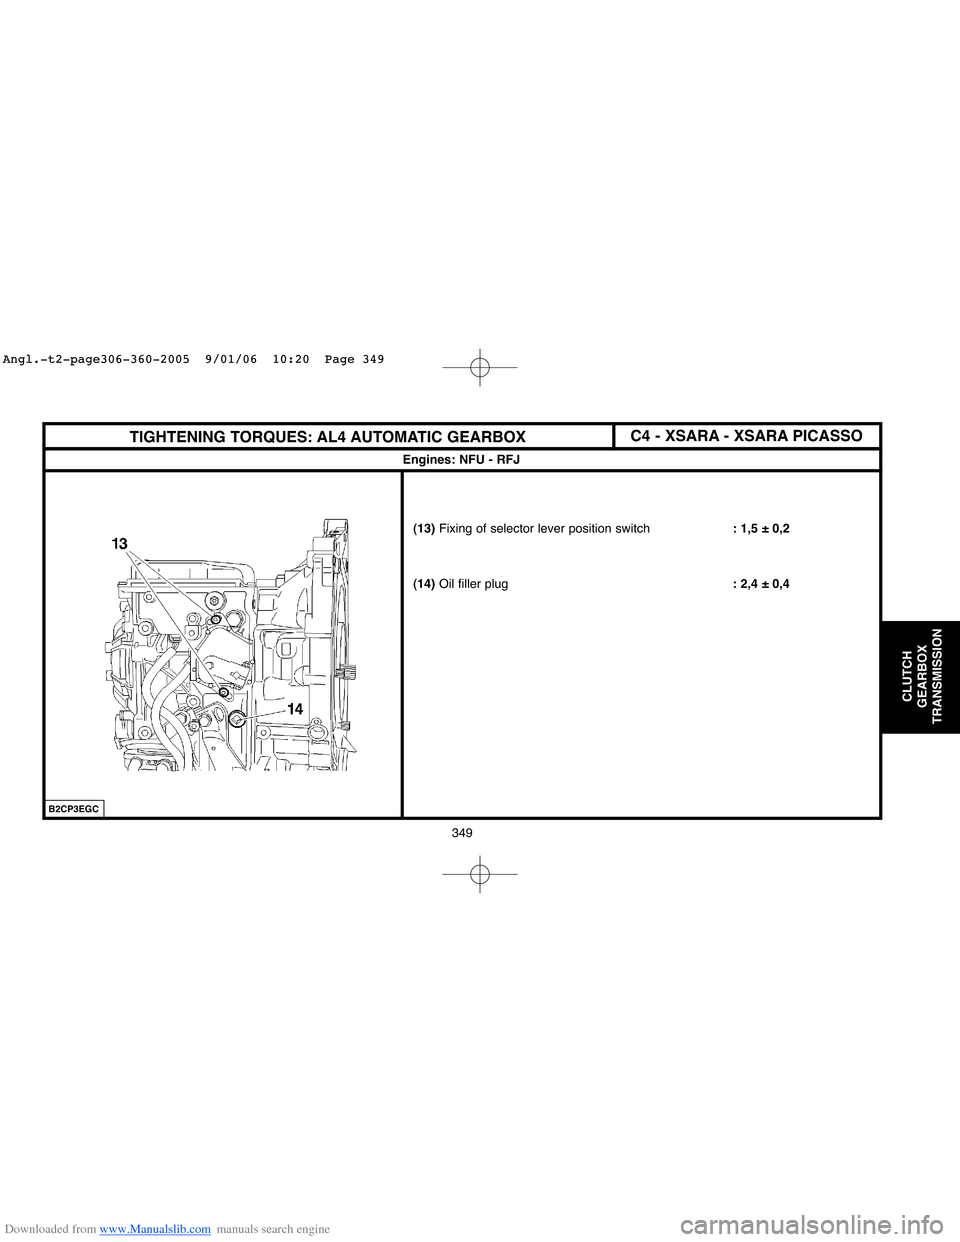 Citroen BERLINGO 2005 1.G Workshop Manual Downloaded from www.Manualslib.com manuals search engine 349
CLUTCH
GEARBOX
TRANSMISSION
Engines: NFU - RFJ
B2CP3EGC
(13)Fixing of selector lever position switch: 1,5 ± 0,2
(14)Oil filler plug: 2,4 �